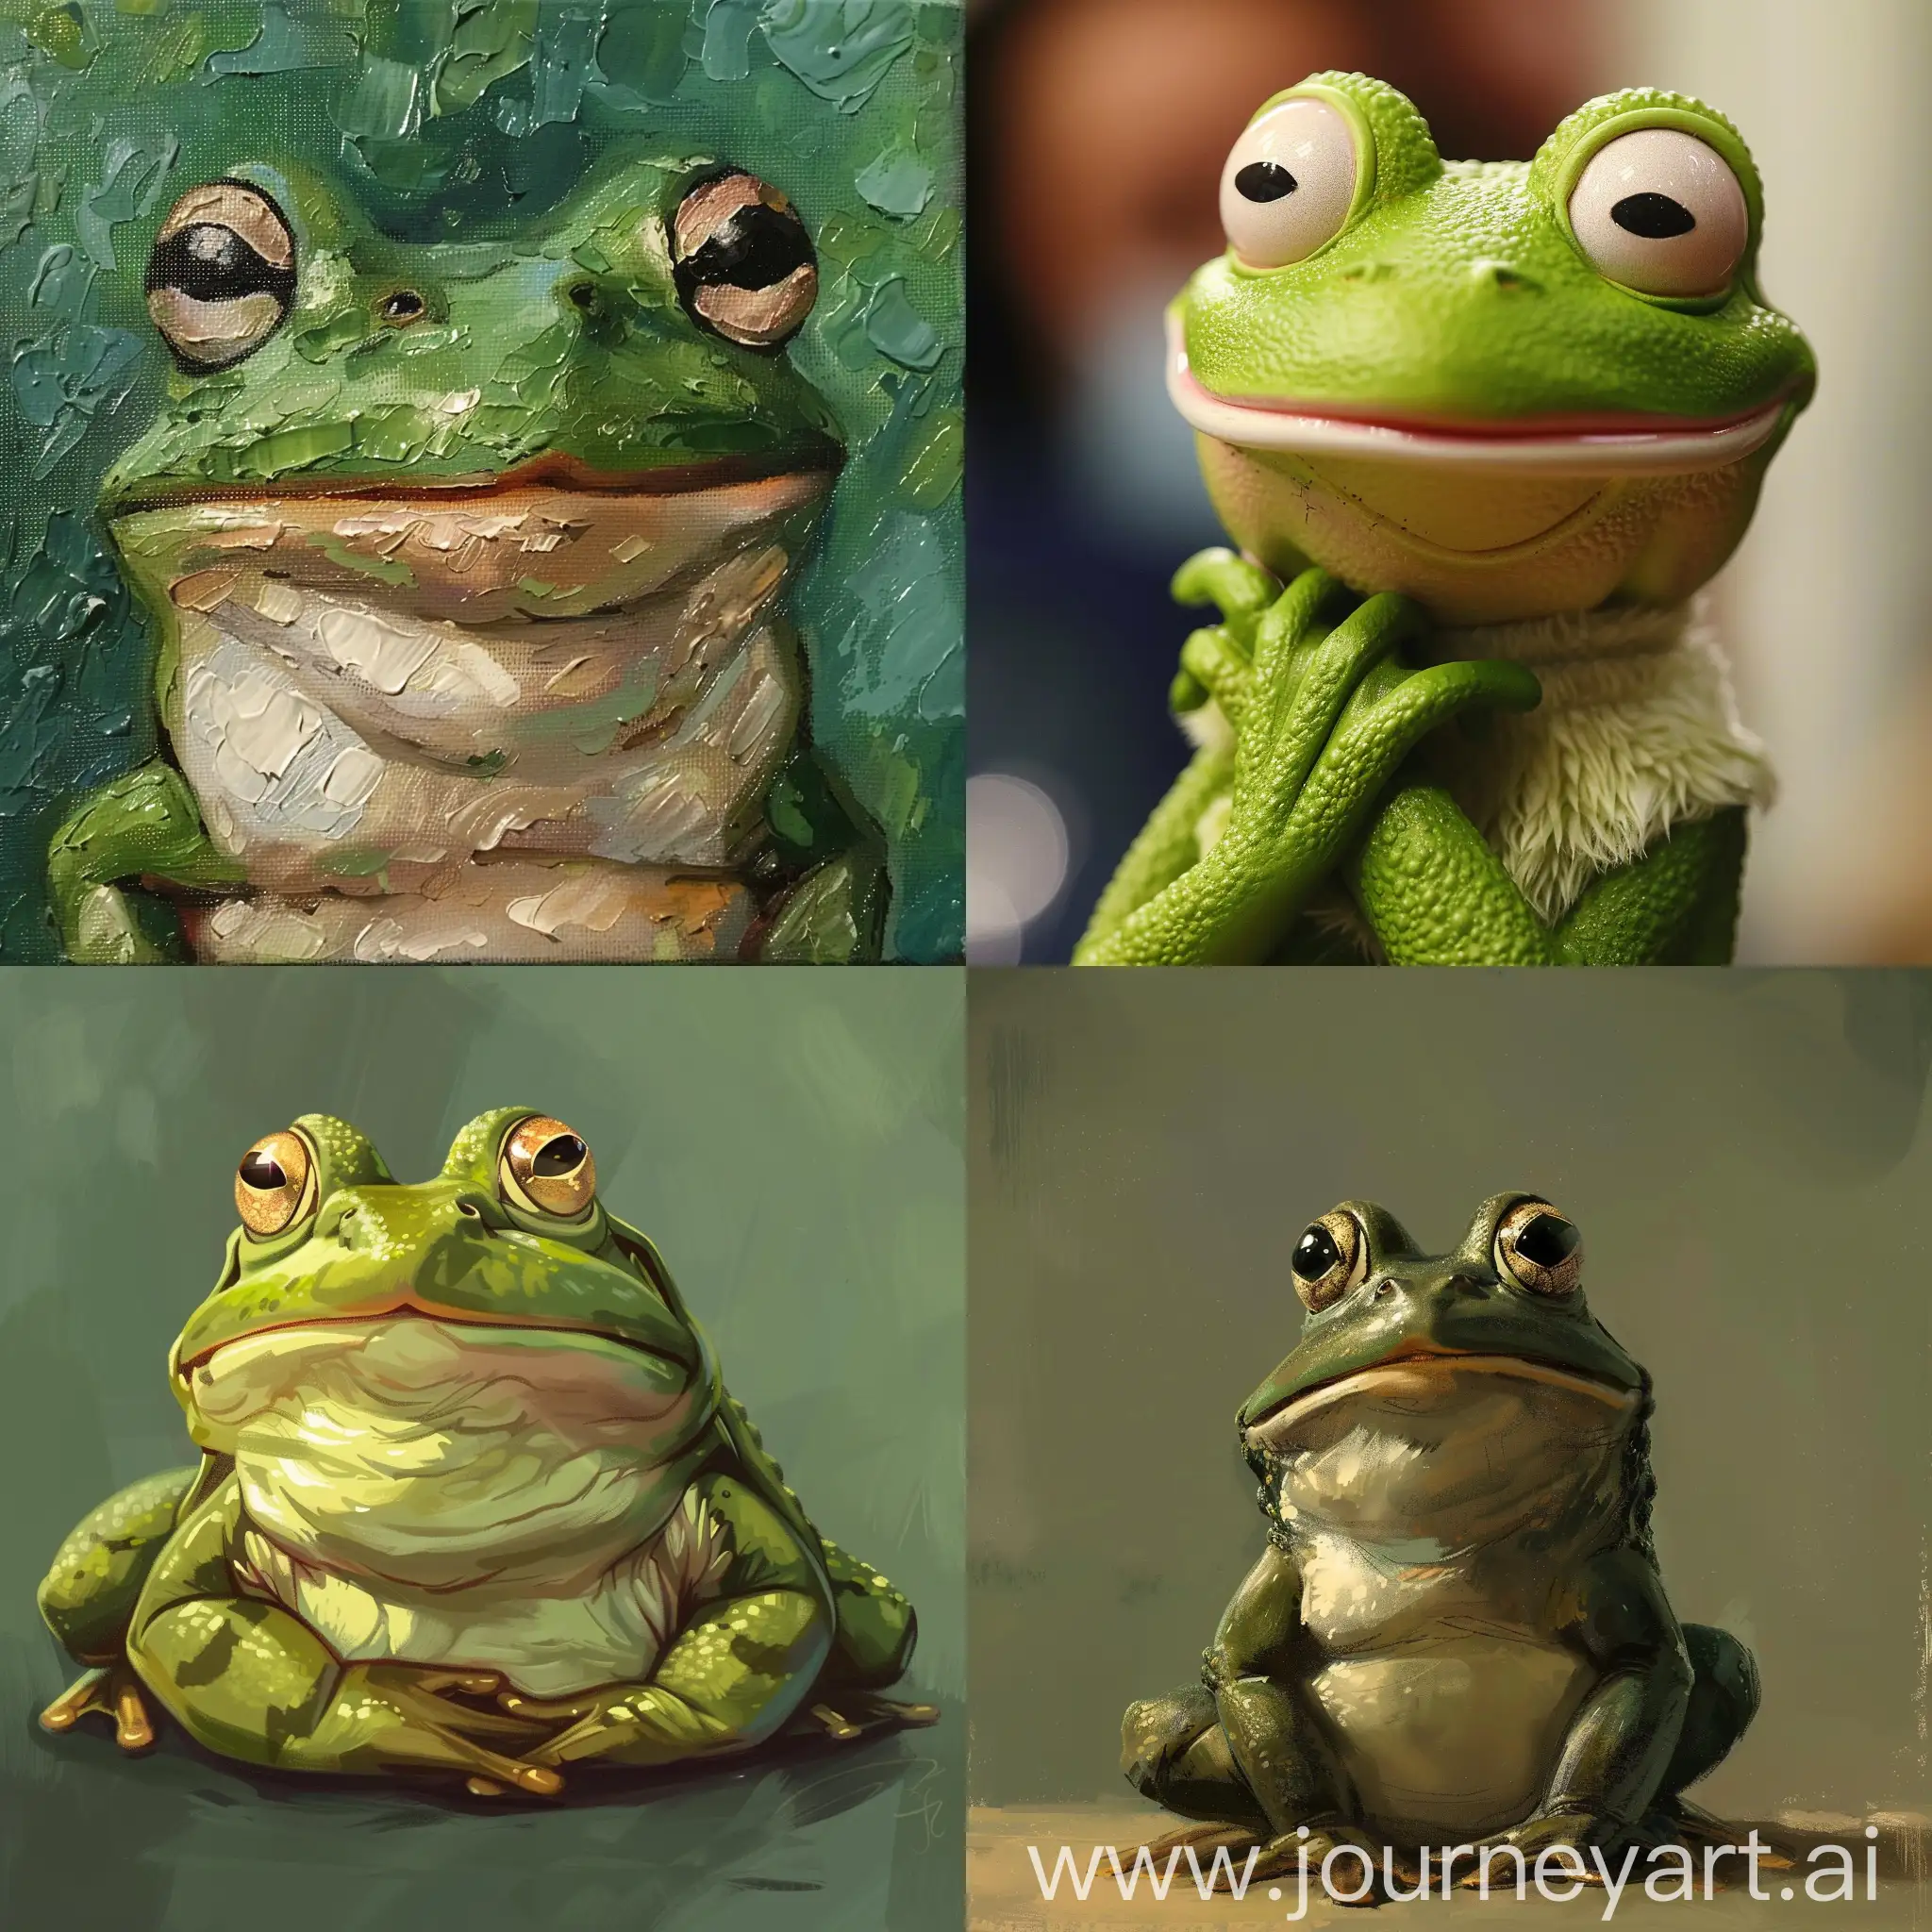 Playful-Pepe-the-Frog-in-Vibrant-Colors